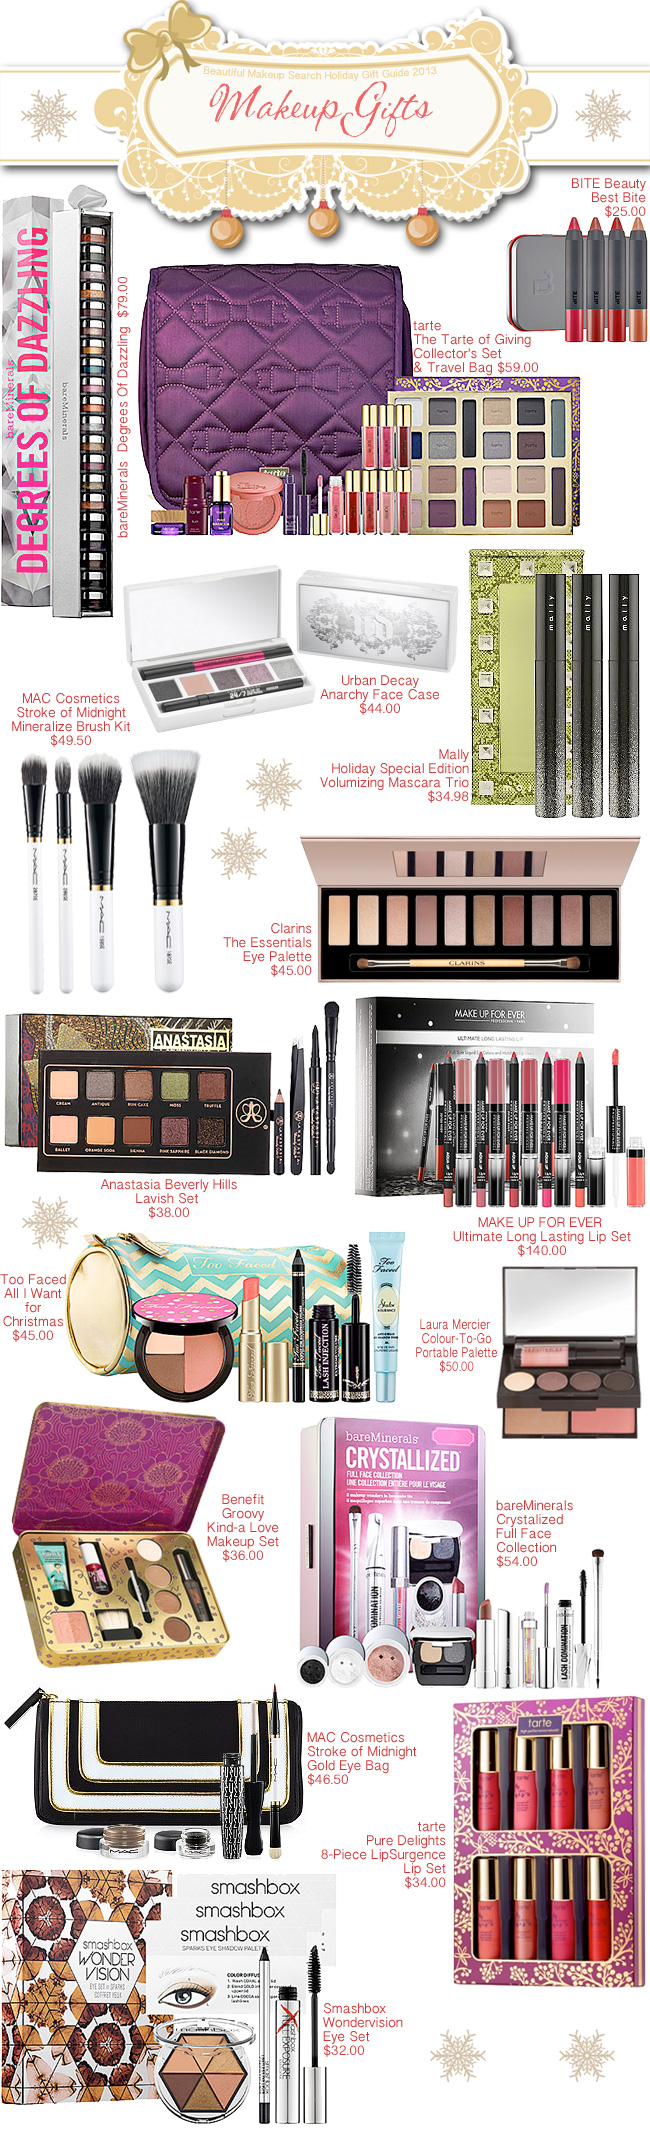 Beautiful Makeup Search Holiday Gift Guide - Makeup Gifts